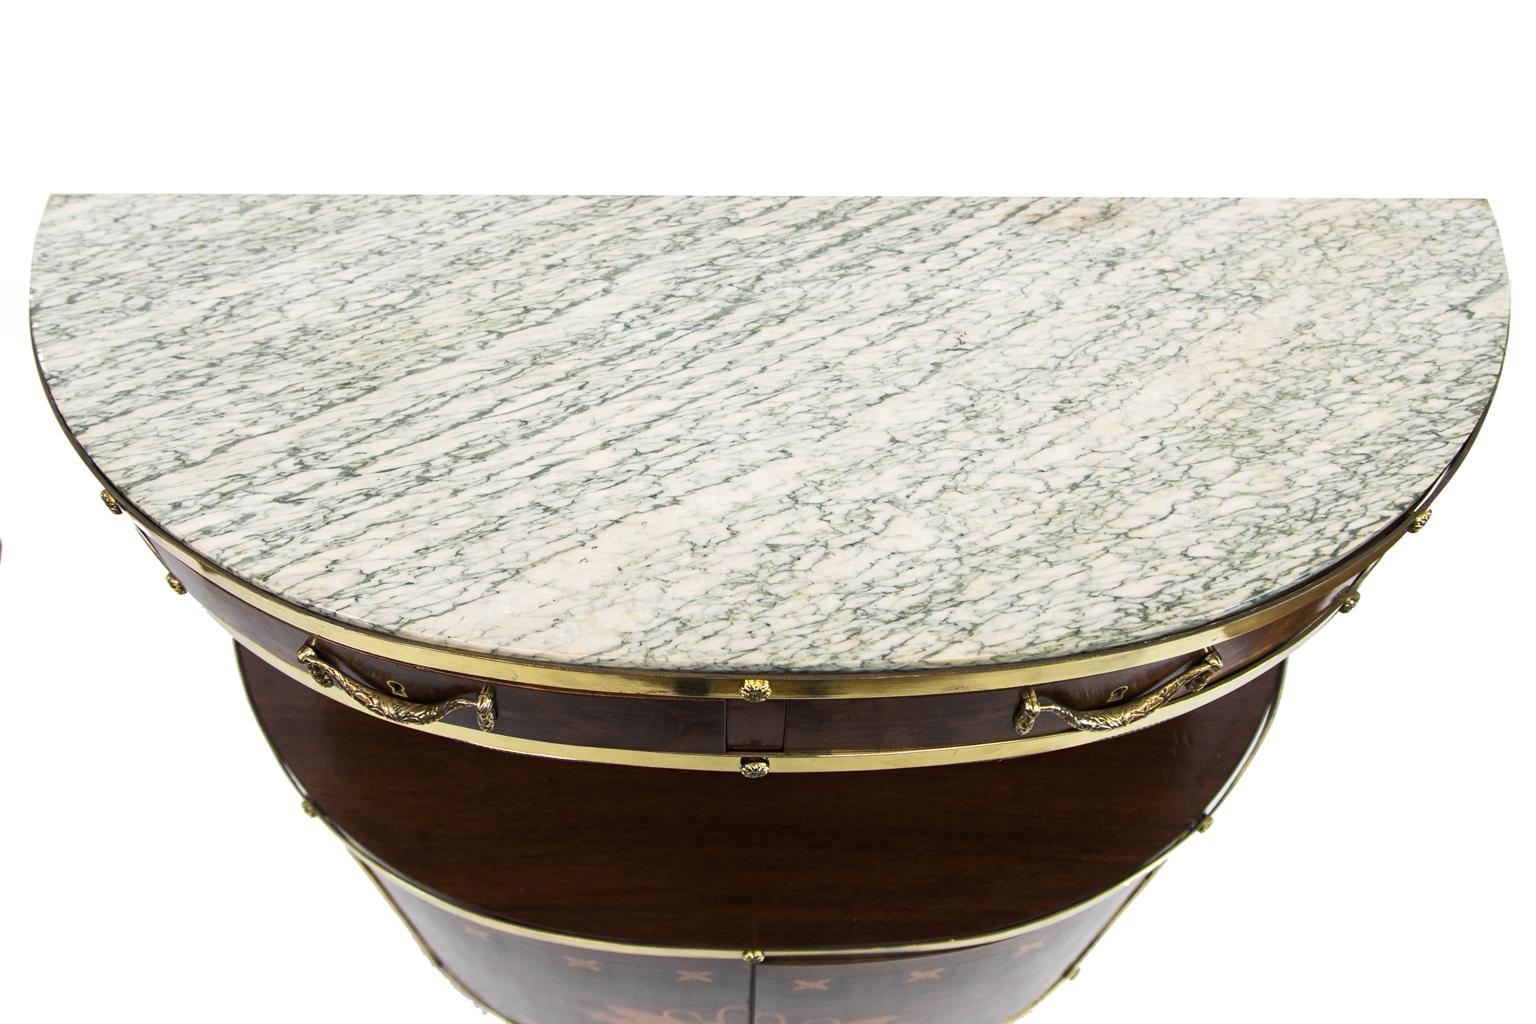 English Marble Top Demi Lune Server, the doors are beautifully inlaid with satinwood swans drinking from a flowing water fountain. The edges have heavy cast brass moldings with crotch mahogany throughout.

